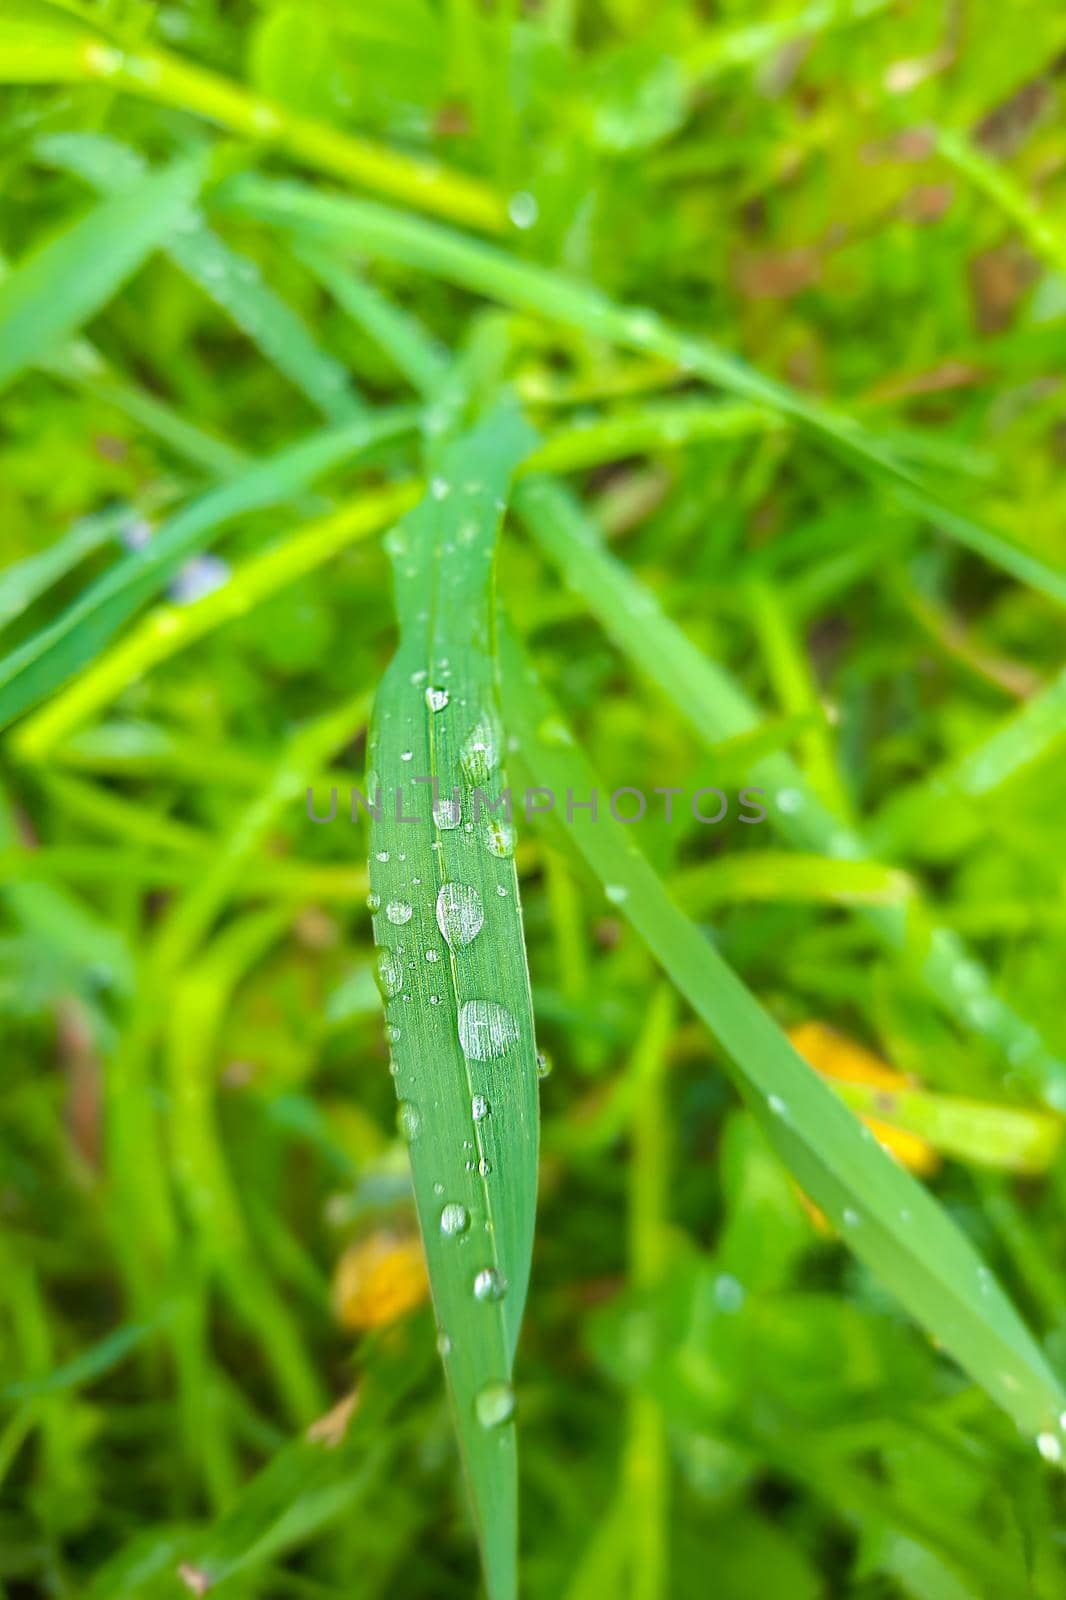 Dew or water drops on green grass after rain. by kip02kas